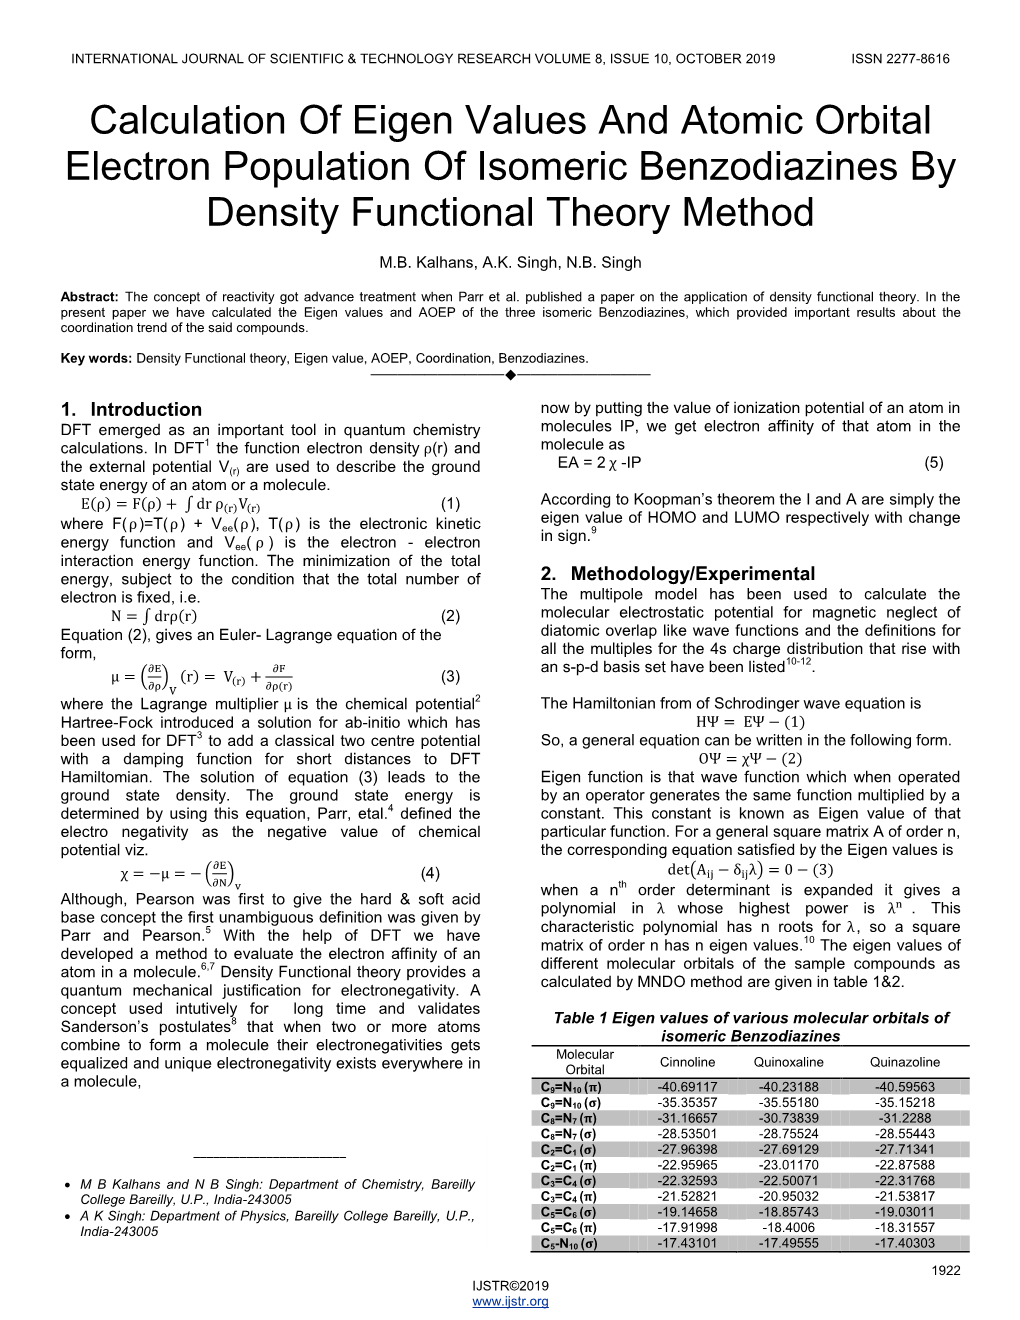 Calculation of Eigen Values and Atomic Orbital Electron Population of Isomeric Benzodiazines by Density Functional Theory Method